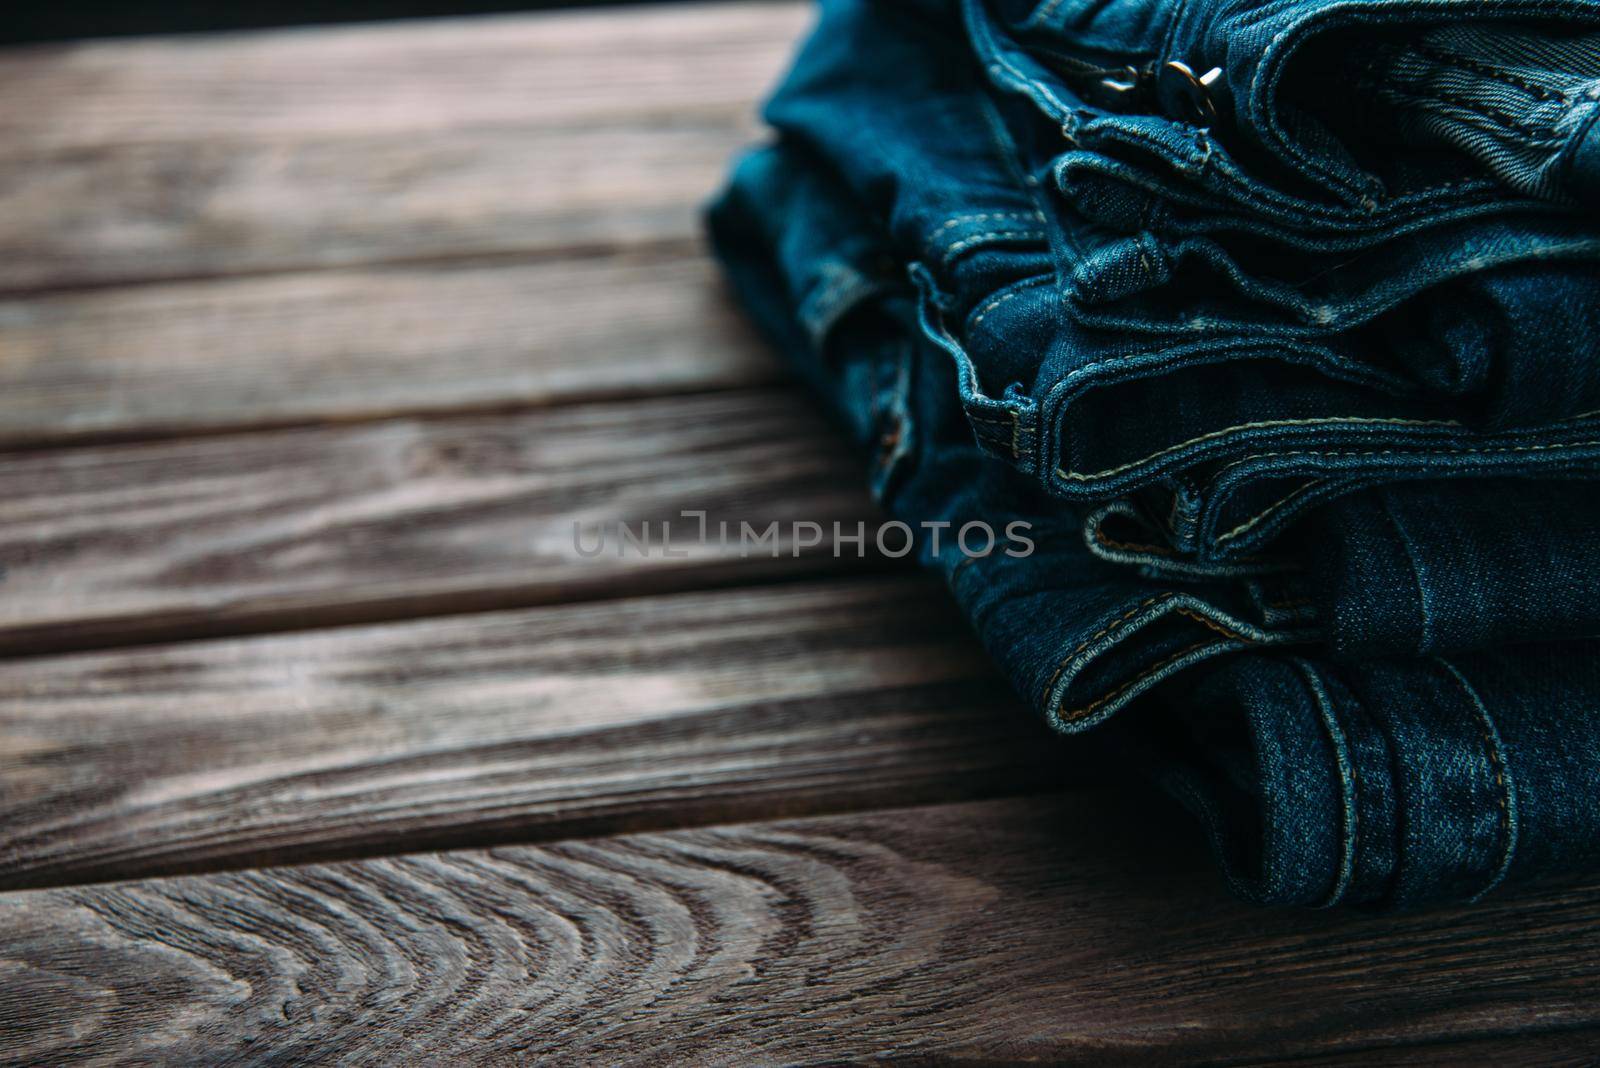 Stack of blue jeans denim pants on a wooden table.